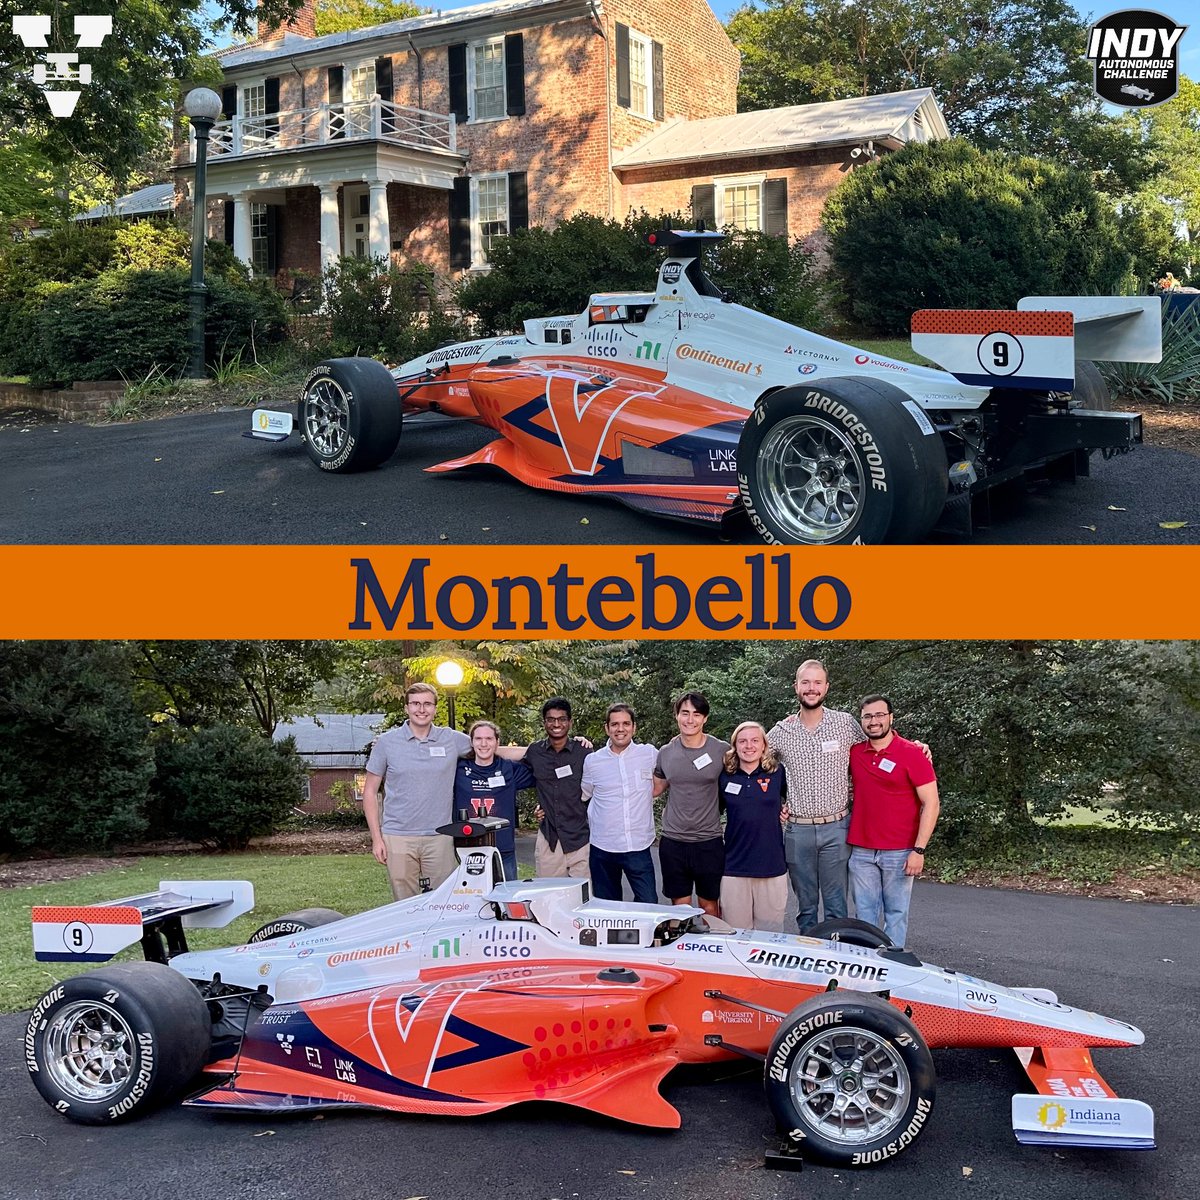 Our Cavalier autonomous racecar just made its debut pitstop at Montebello, the University of Virginia's historic 200-year-old residence. Stay tuned—there's more to come!🏛️🏎️ @UVAEngineers @UVA @UVALinkLab @CS_UVA #HOOSRacing